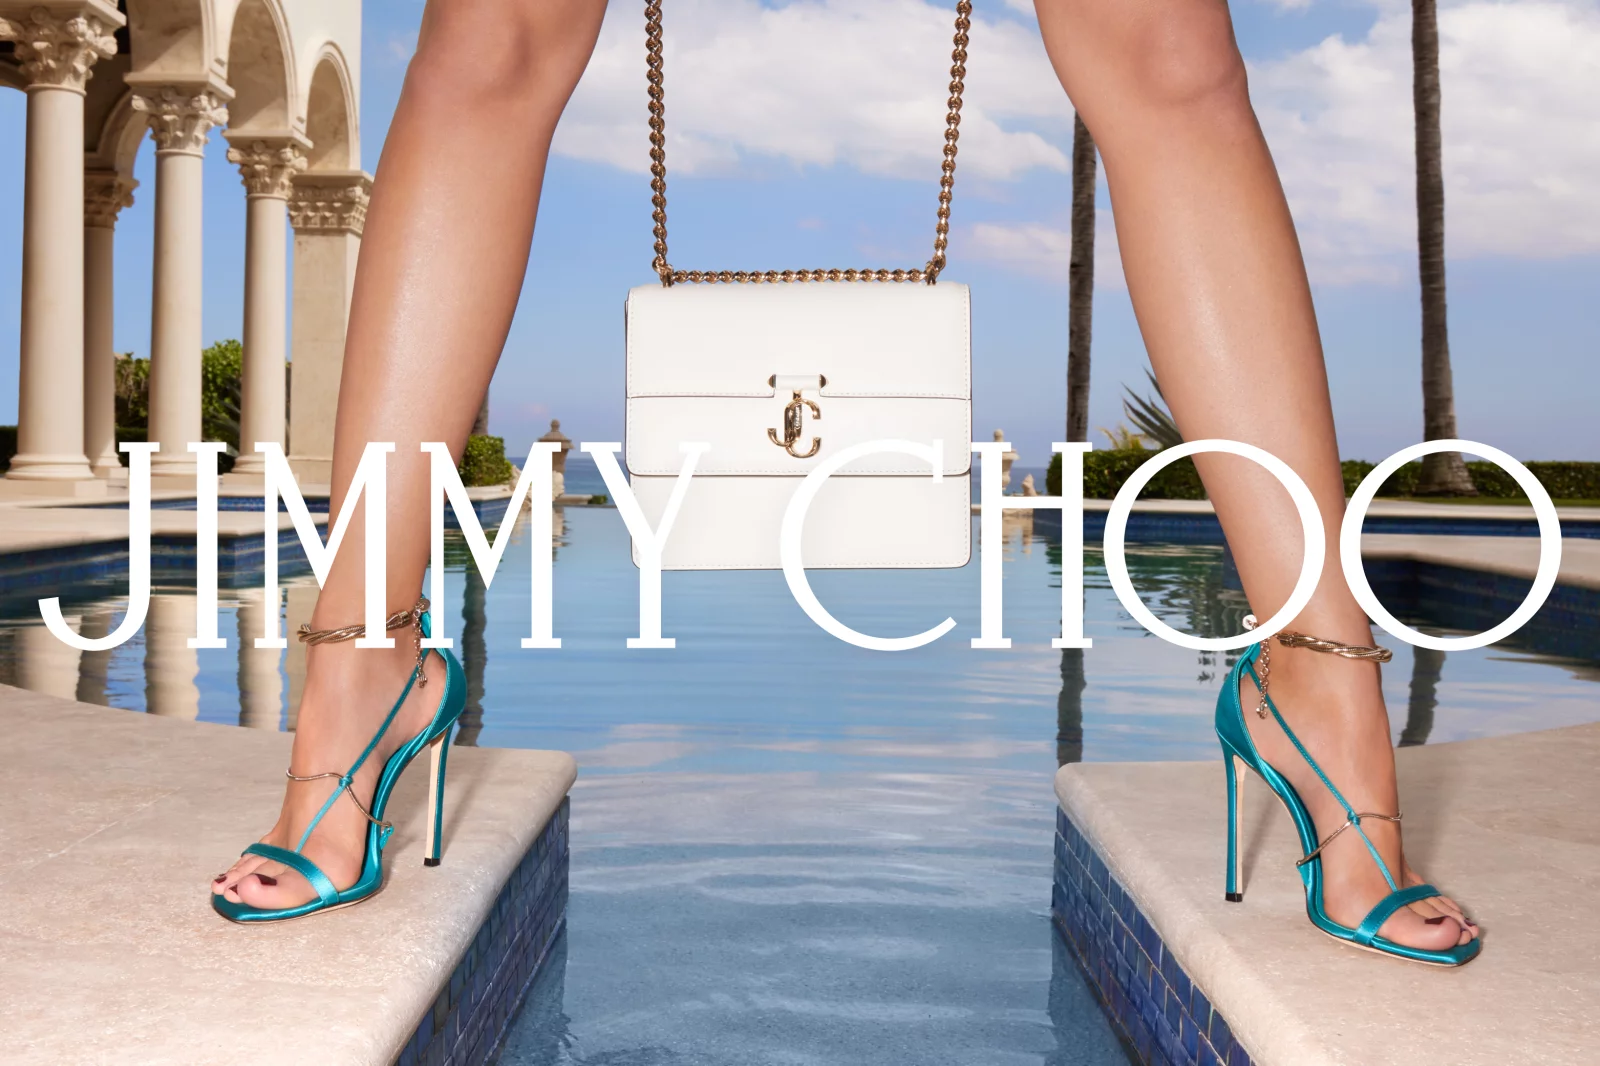 Jimmy Choo 4 by Claire ROTHSTEIN